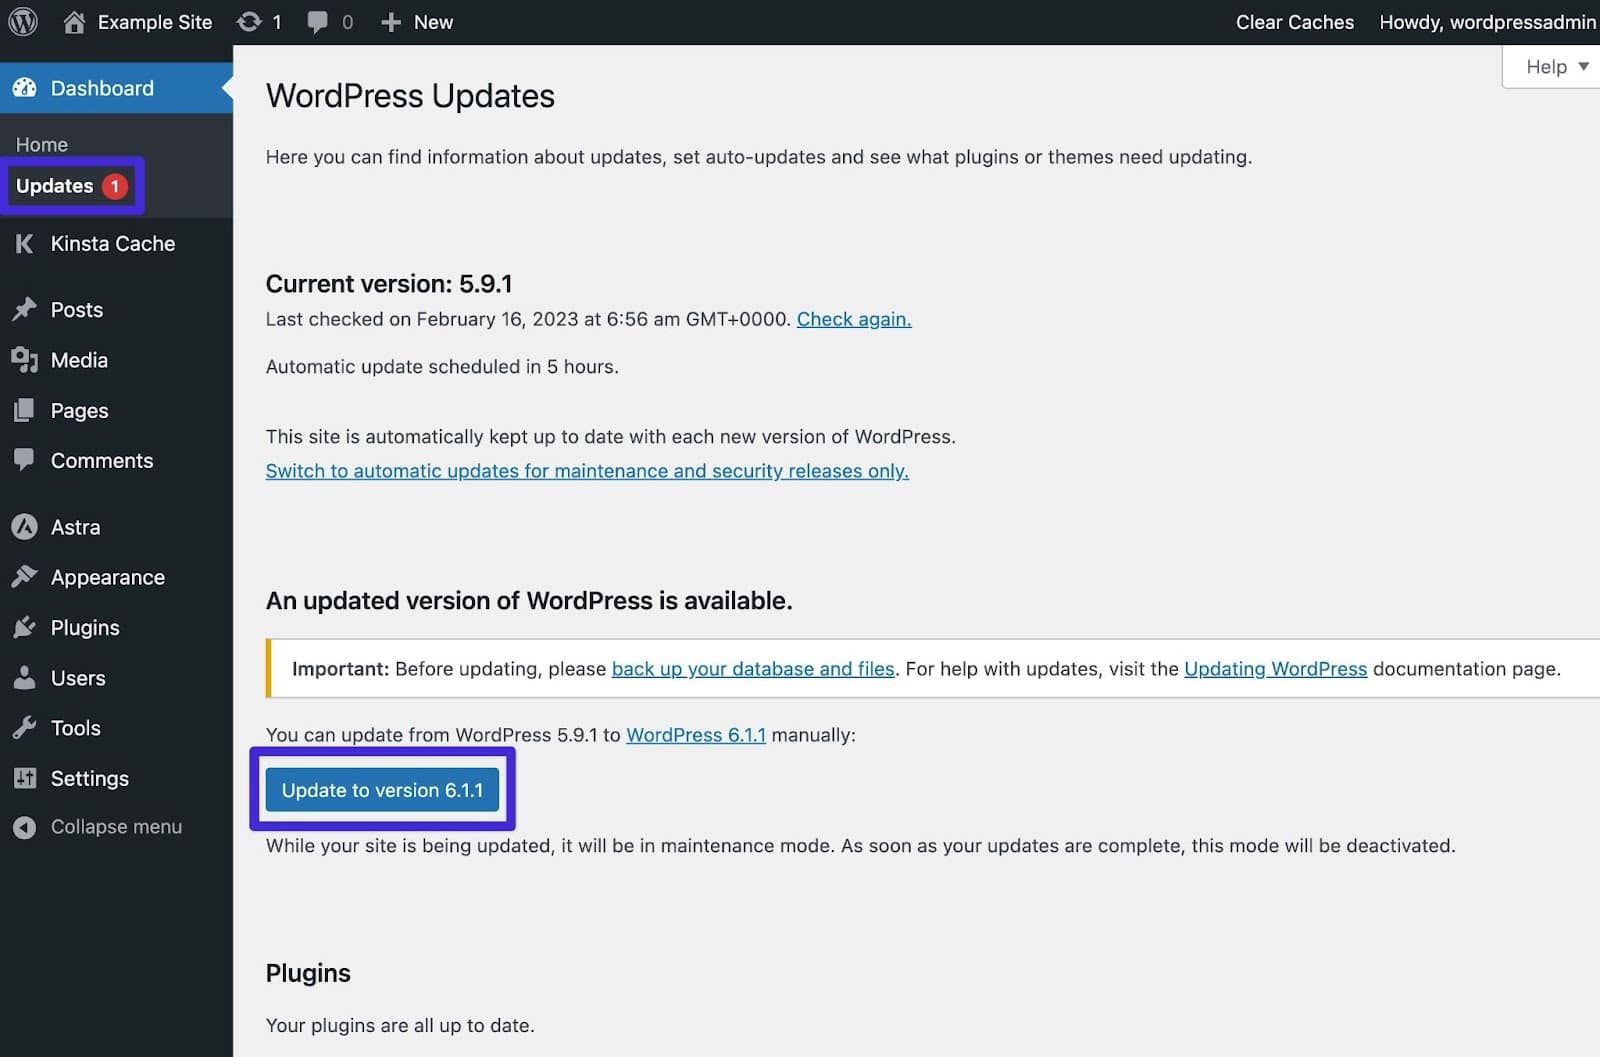 Click the button to update your WordPress version